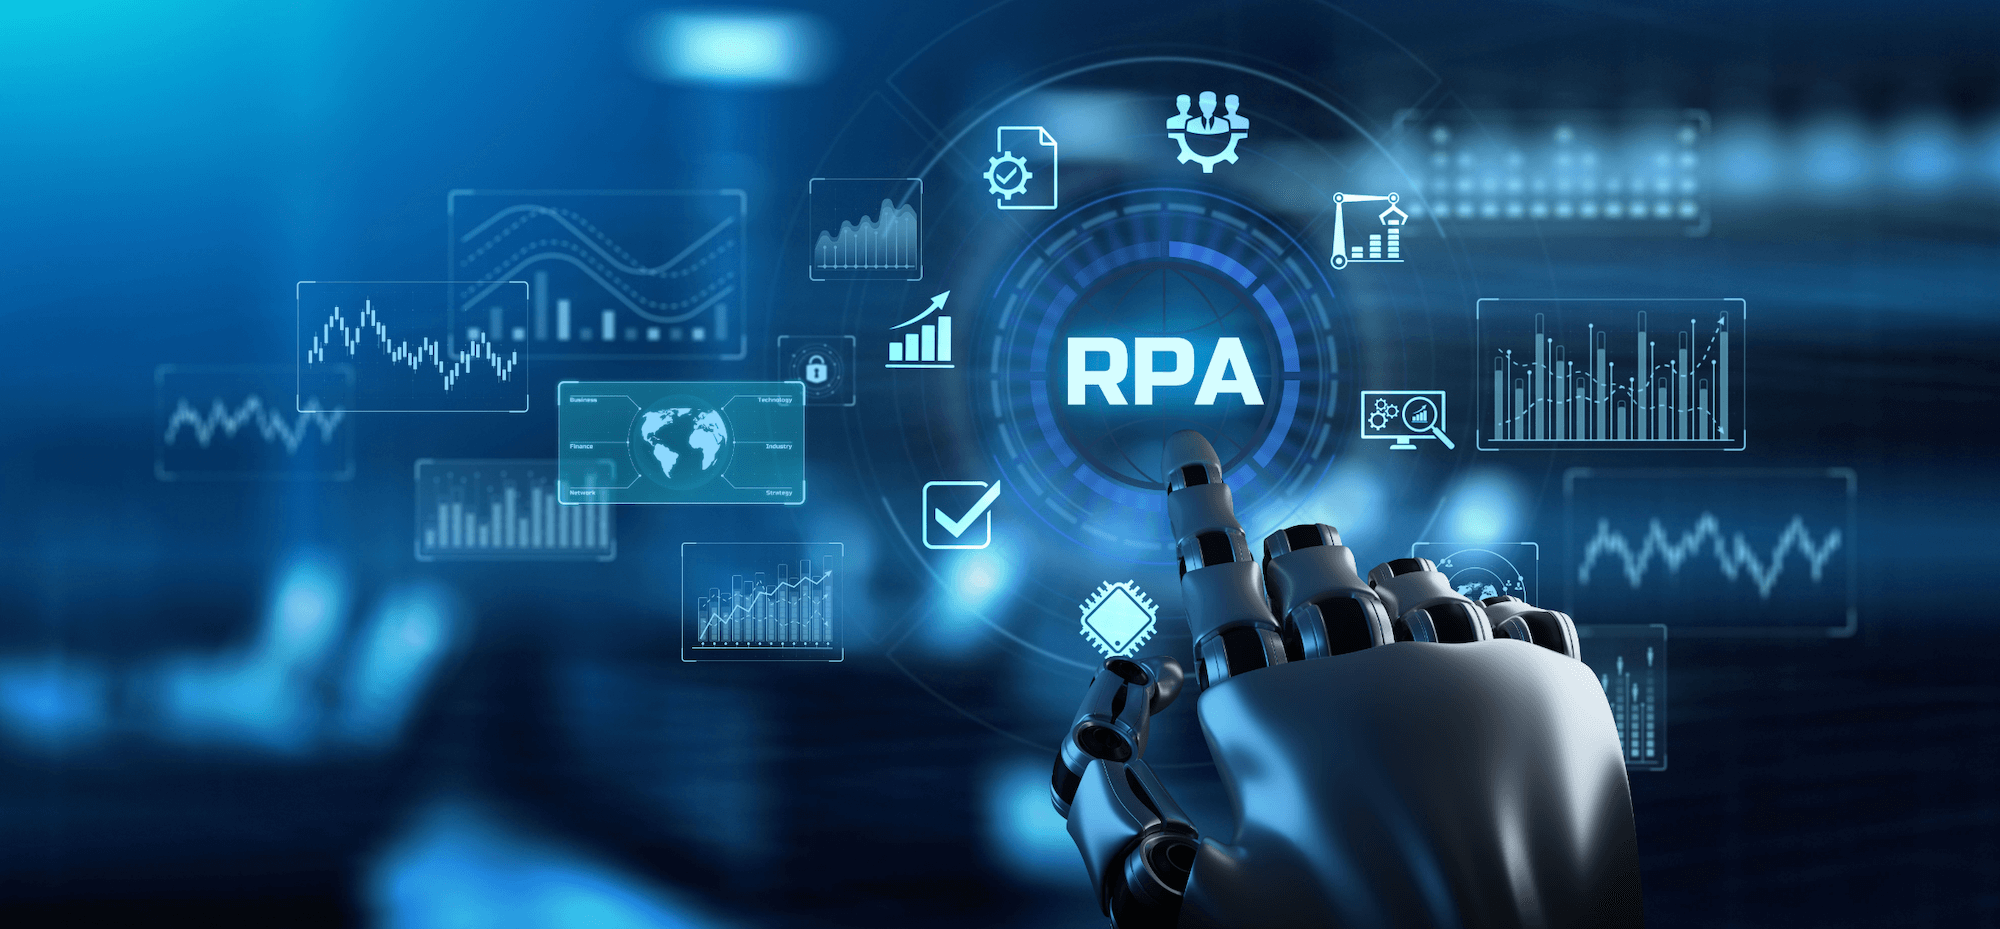 Which Processes Can Be Automated Using RPA